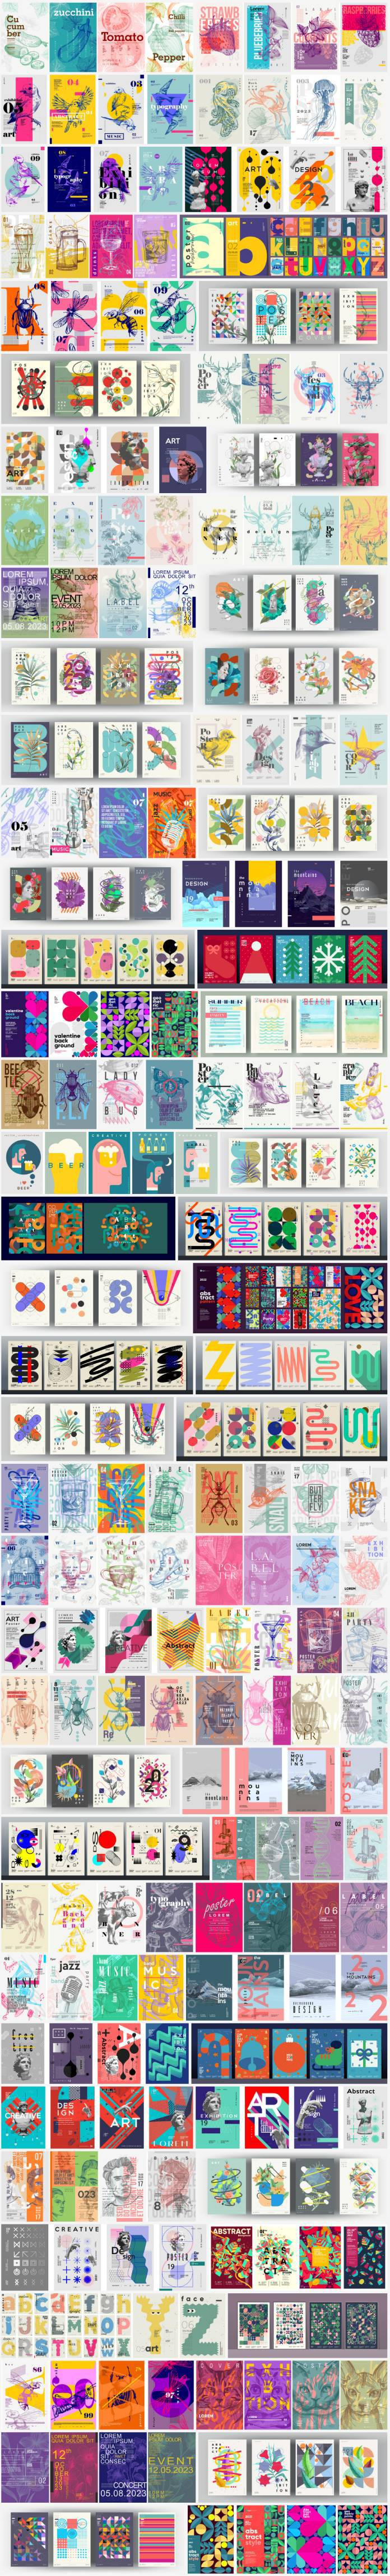 Editable graphic poster templates with abstract geometric shapes in different colors.